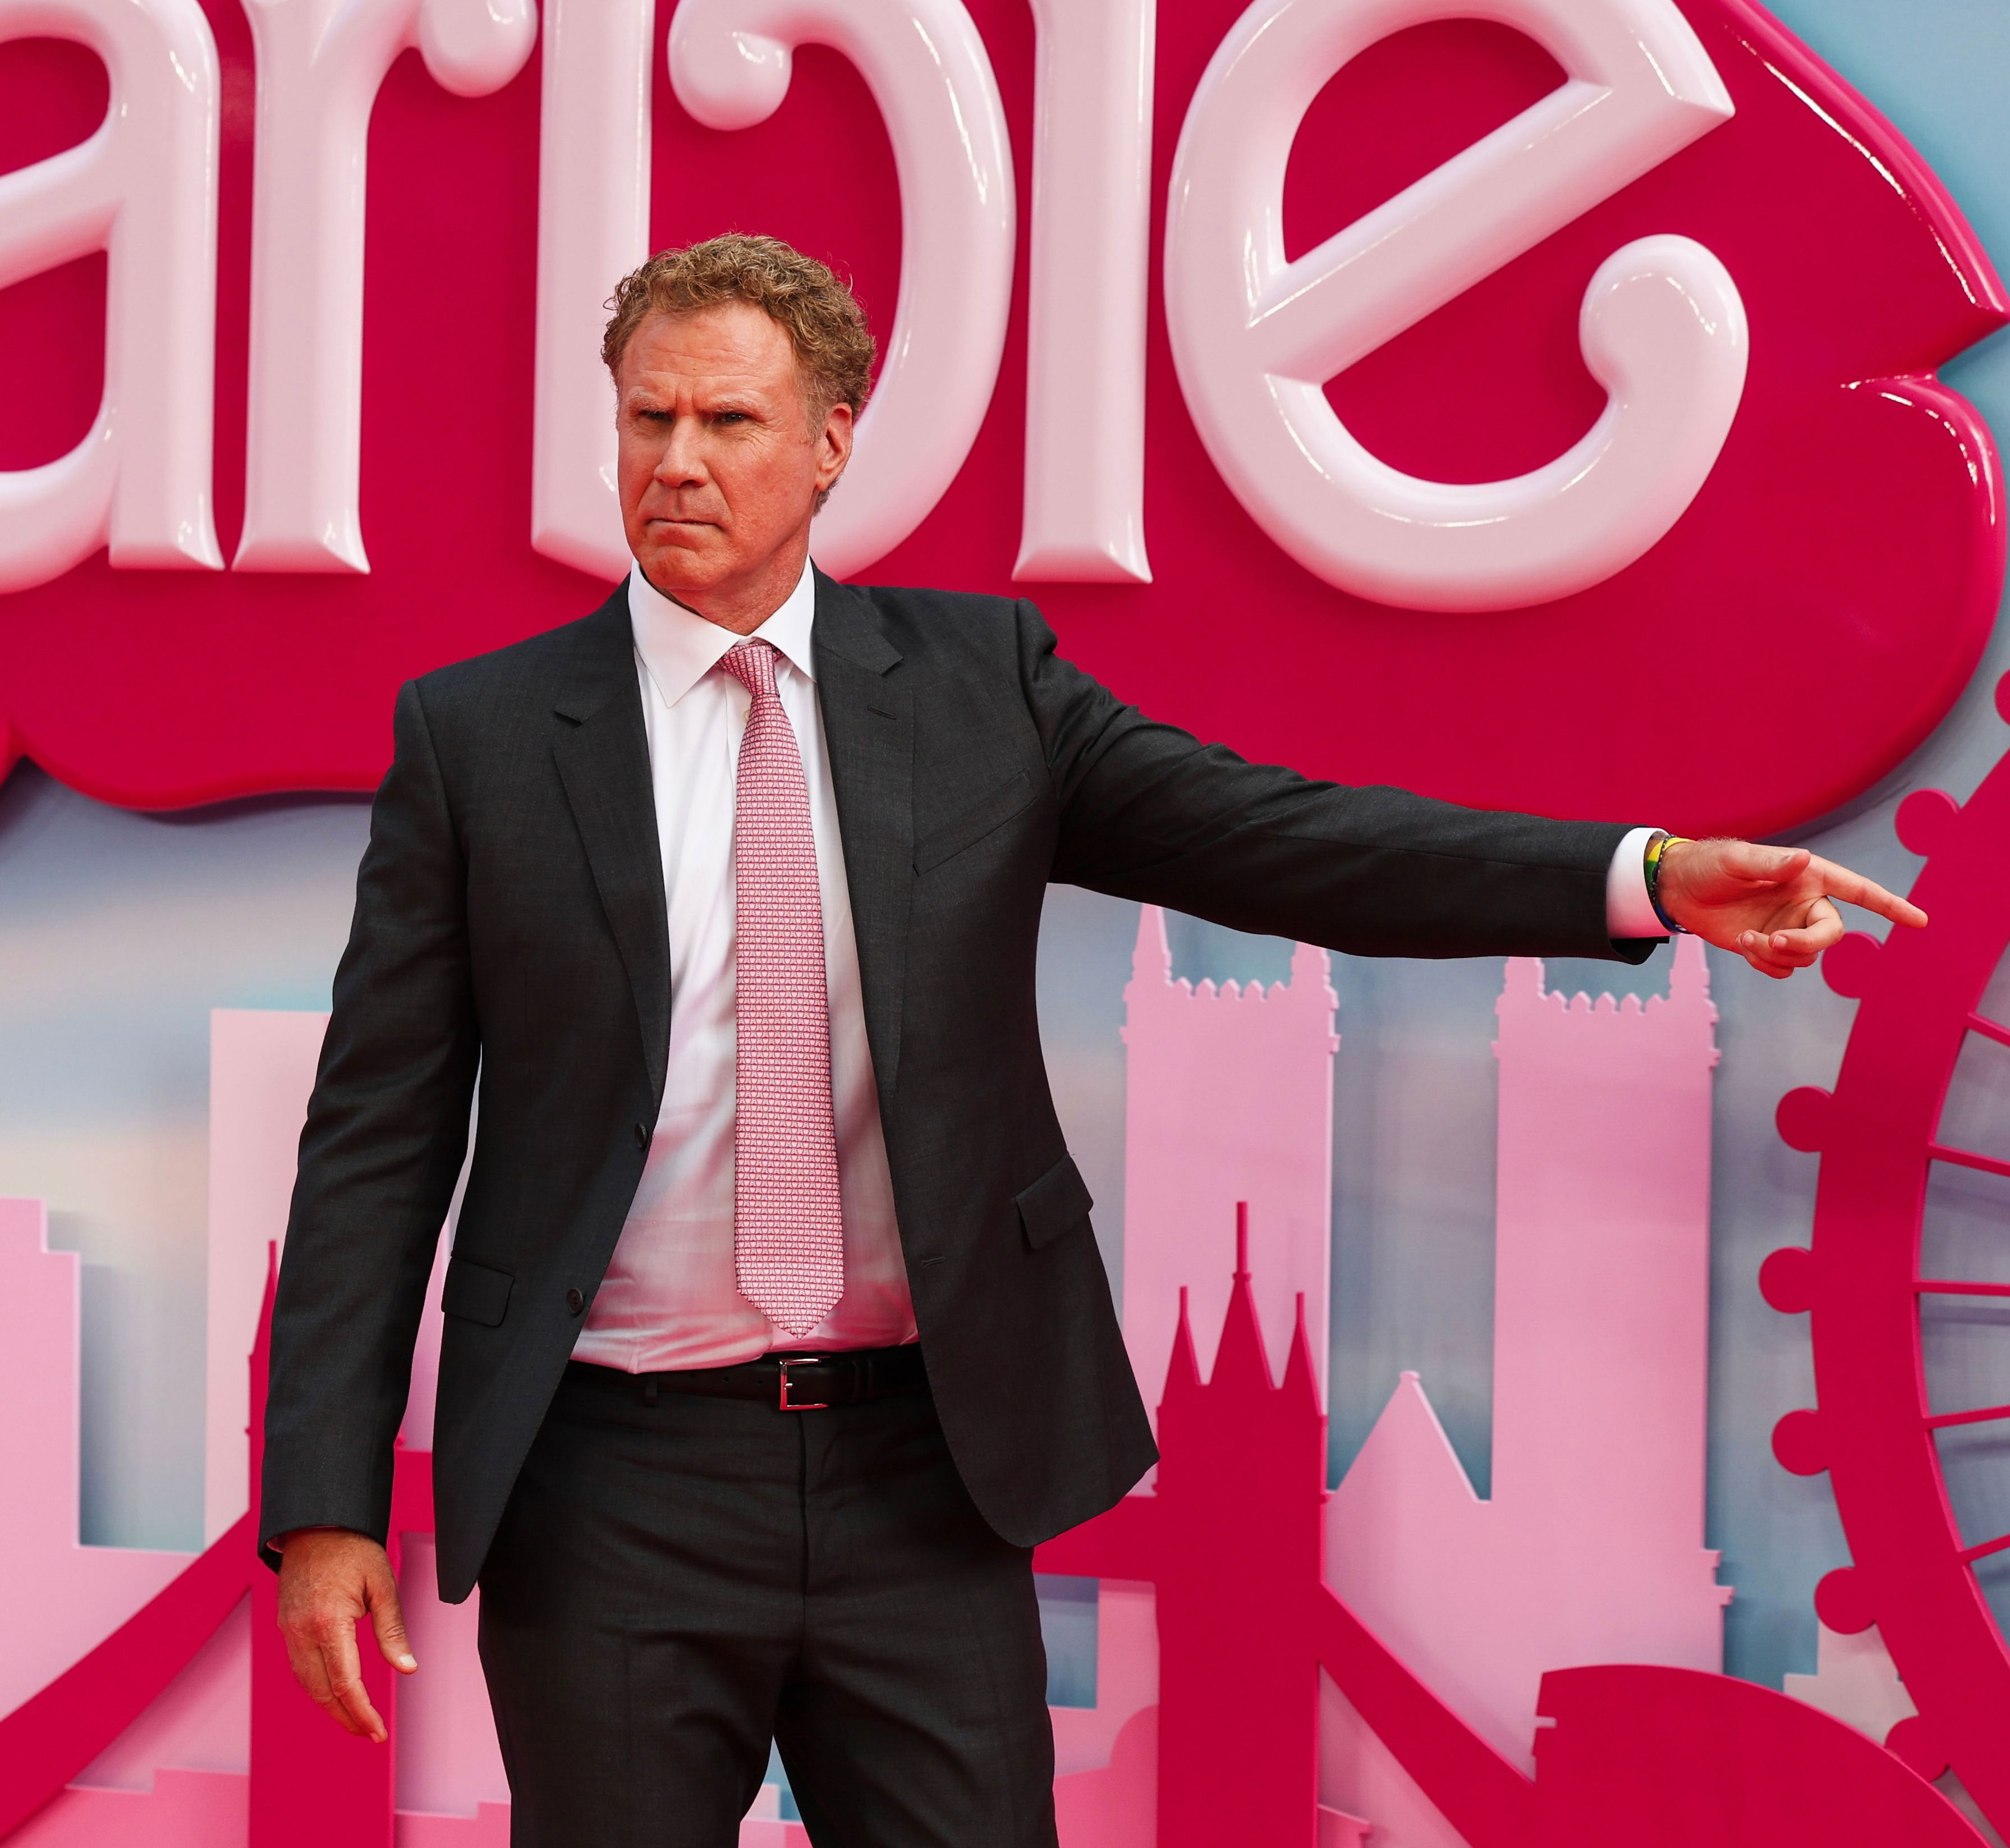 <p>Nearly a decade after his President Business turn in "The Lego Movie," Will Ferrell took on another memorable businessman role when he played the Mattel's hilariously clueless CEO in Greta Gerwig's "Barbie." It was another relatively small part that made a big splash -- and the movie did, too, earning eight Oscar nods. While the funny, feminist film went over budget, spending about $150 million, it made that money back and then some. With its $1.446 billion box office haul, "Barbie" was both the highest-grossing film of 2023 and the 14th highest-grossing film of all time, according to Variety. </p>